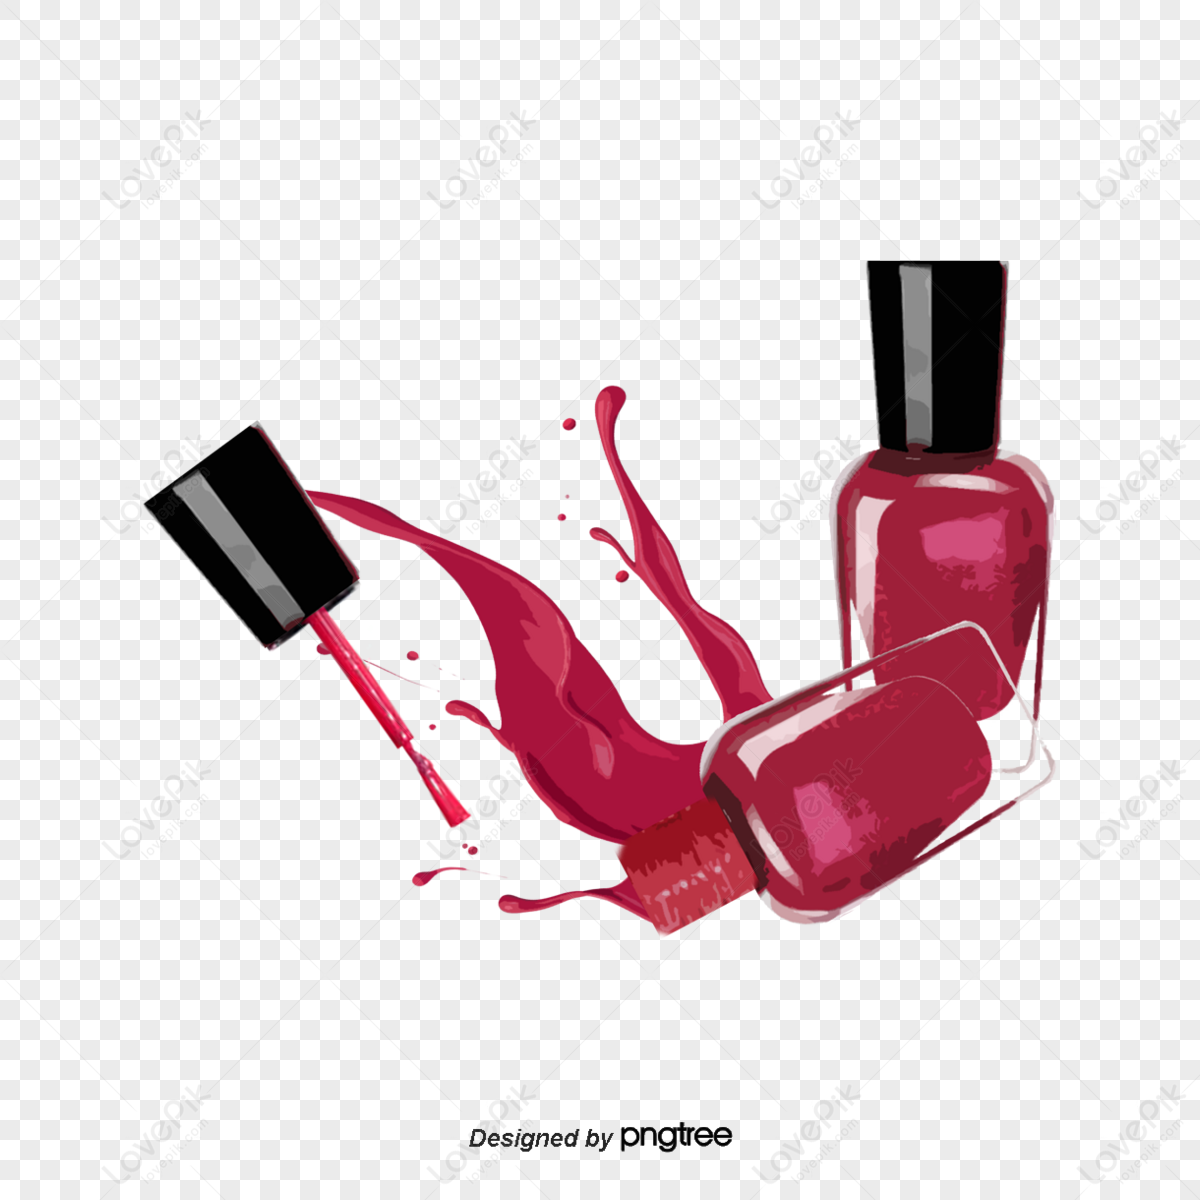 Flat Design Vector Illustration Of An Open Bottle Of Nail Polish Vector,  Cosmetic, Women, Sign PNG and Vector with Transparent Background for Free  Download